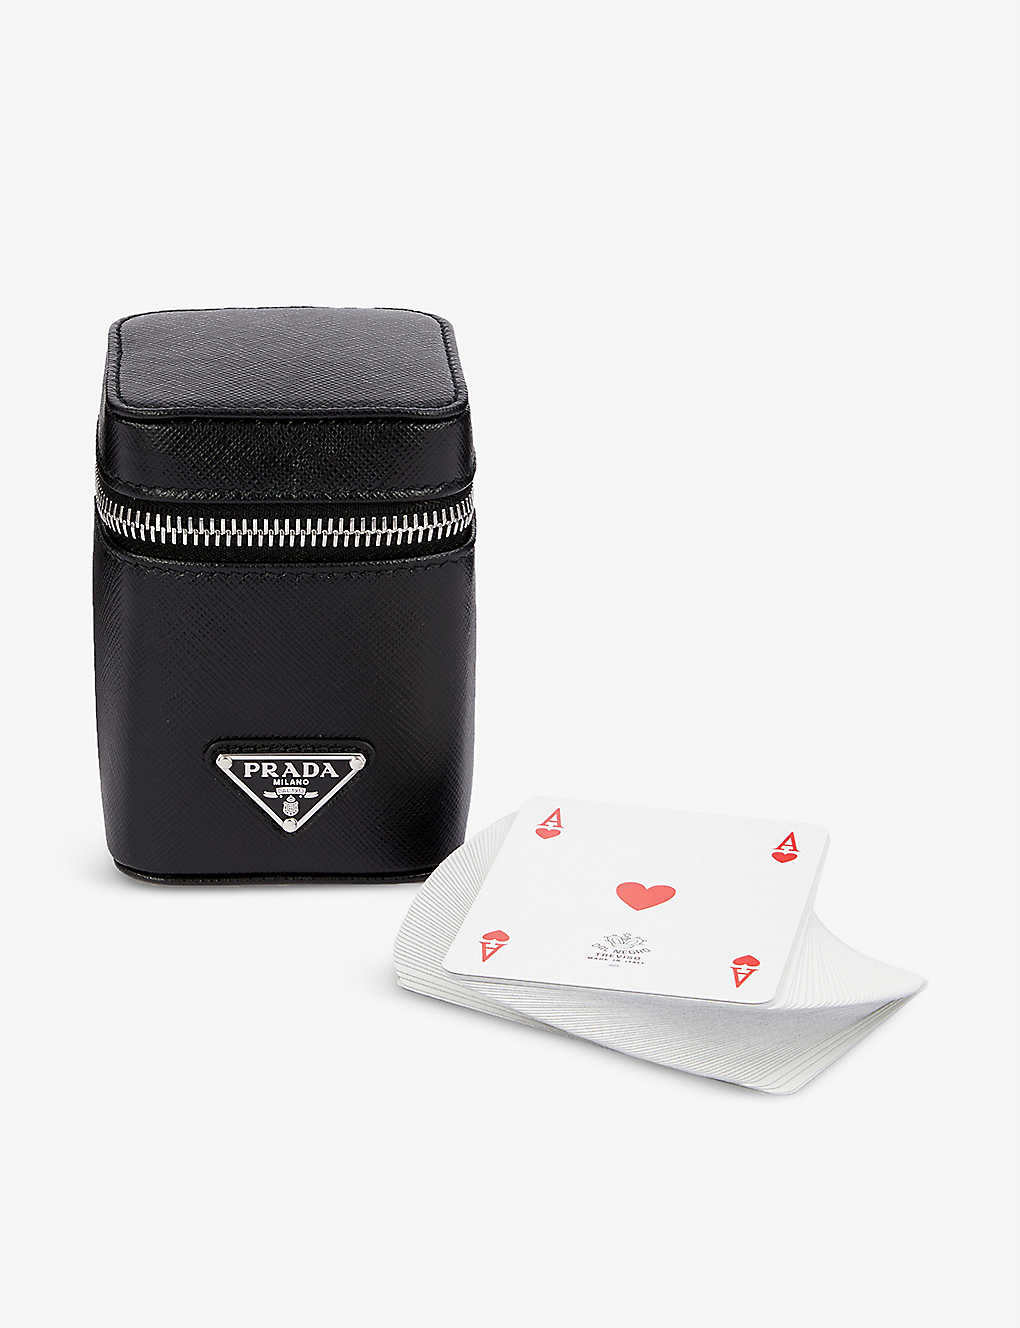 Branded leather playing card holder(9210749)